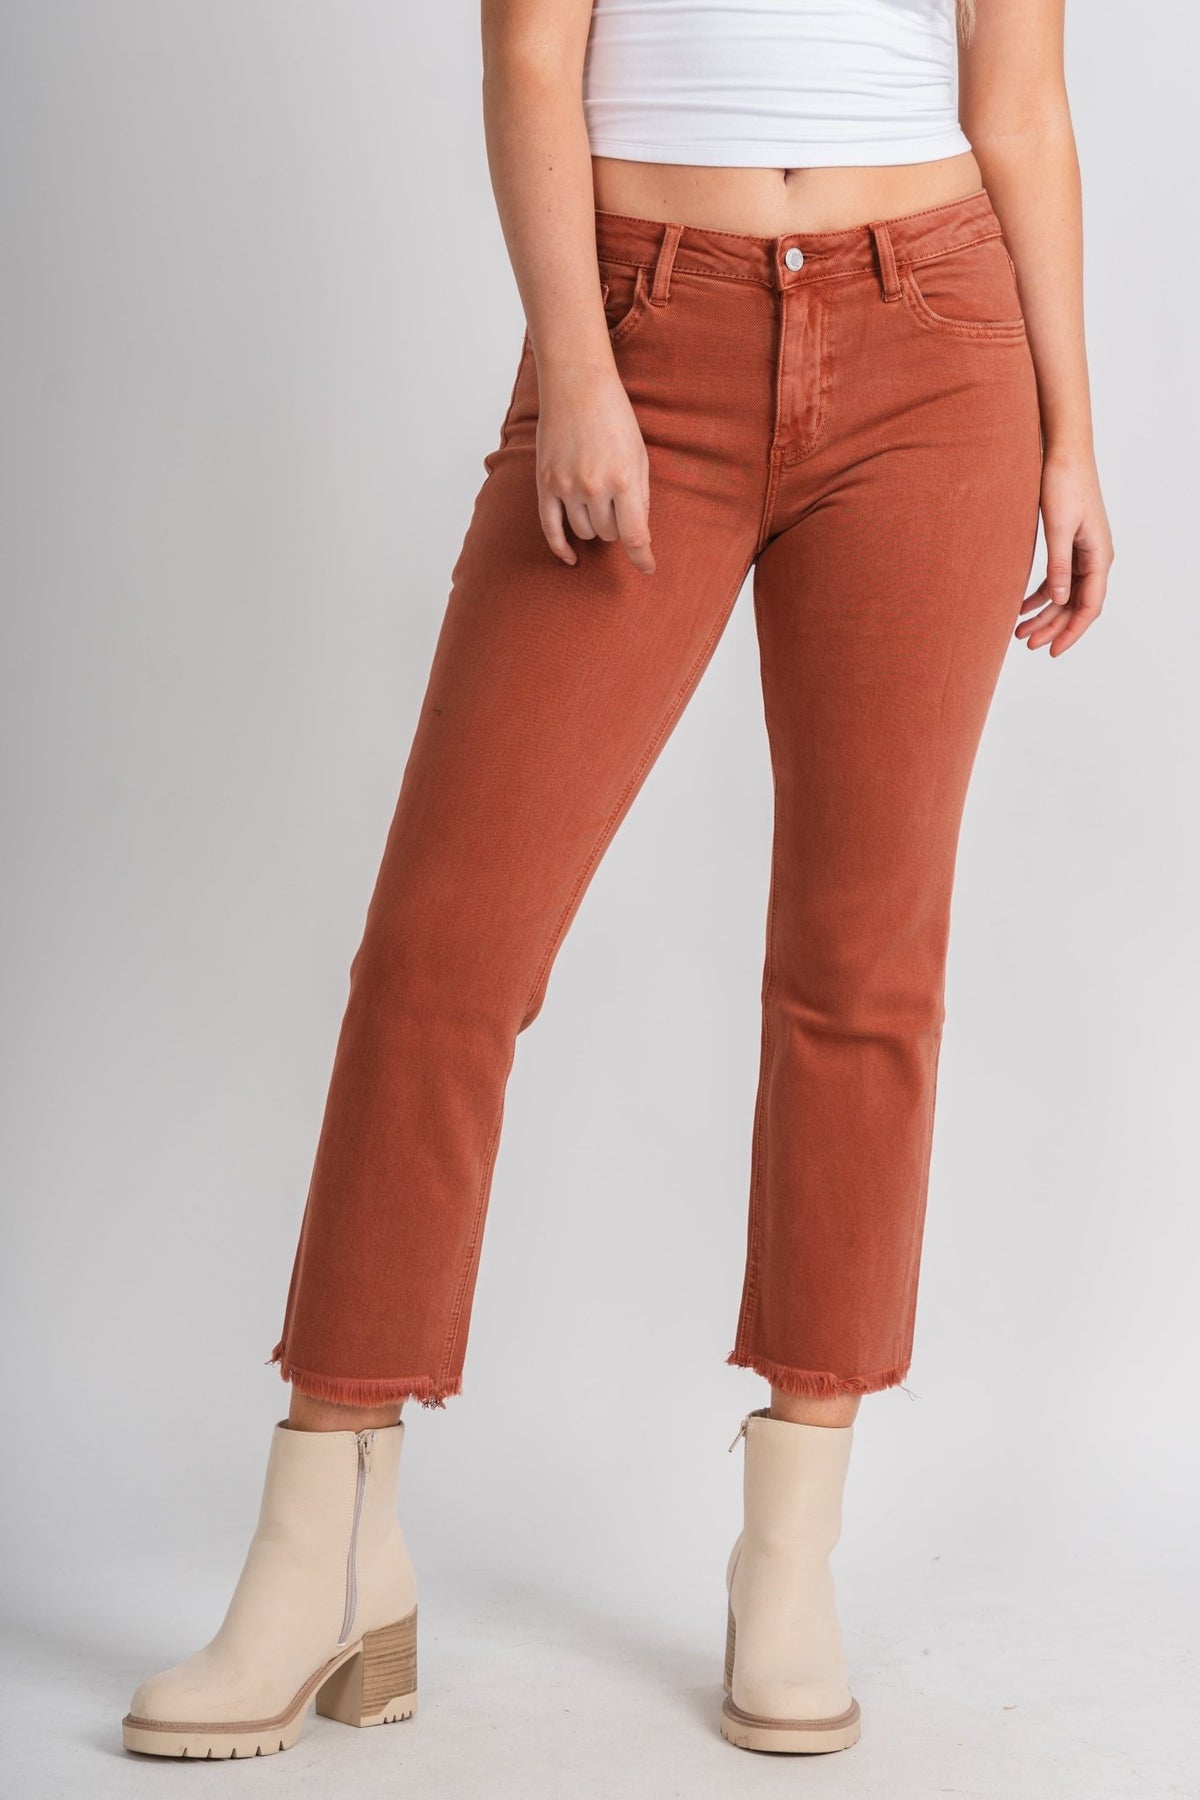 Vervet mid right crop straight jeans baked clay | Lush Fashion Lounge: boutique women's jeans, fashion jeans for women, affordable fashion jeans, cute boutique jeans